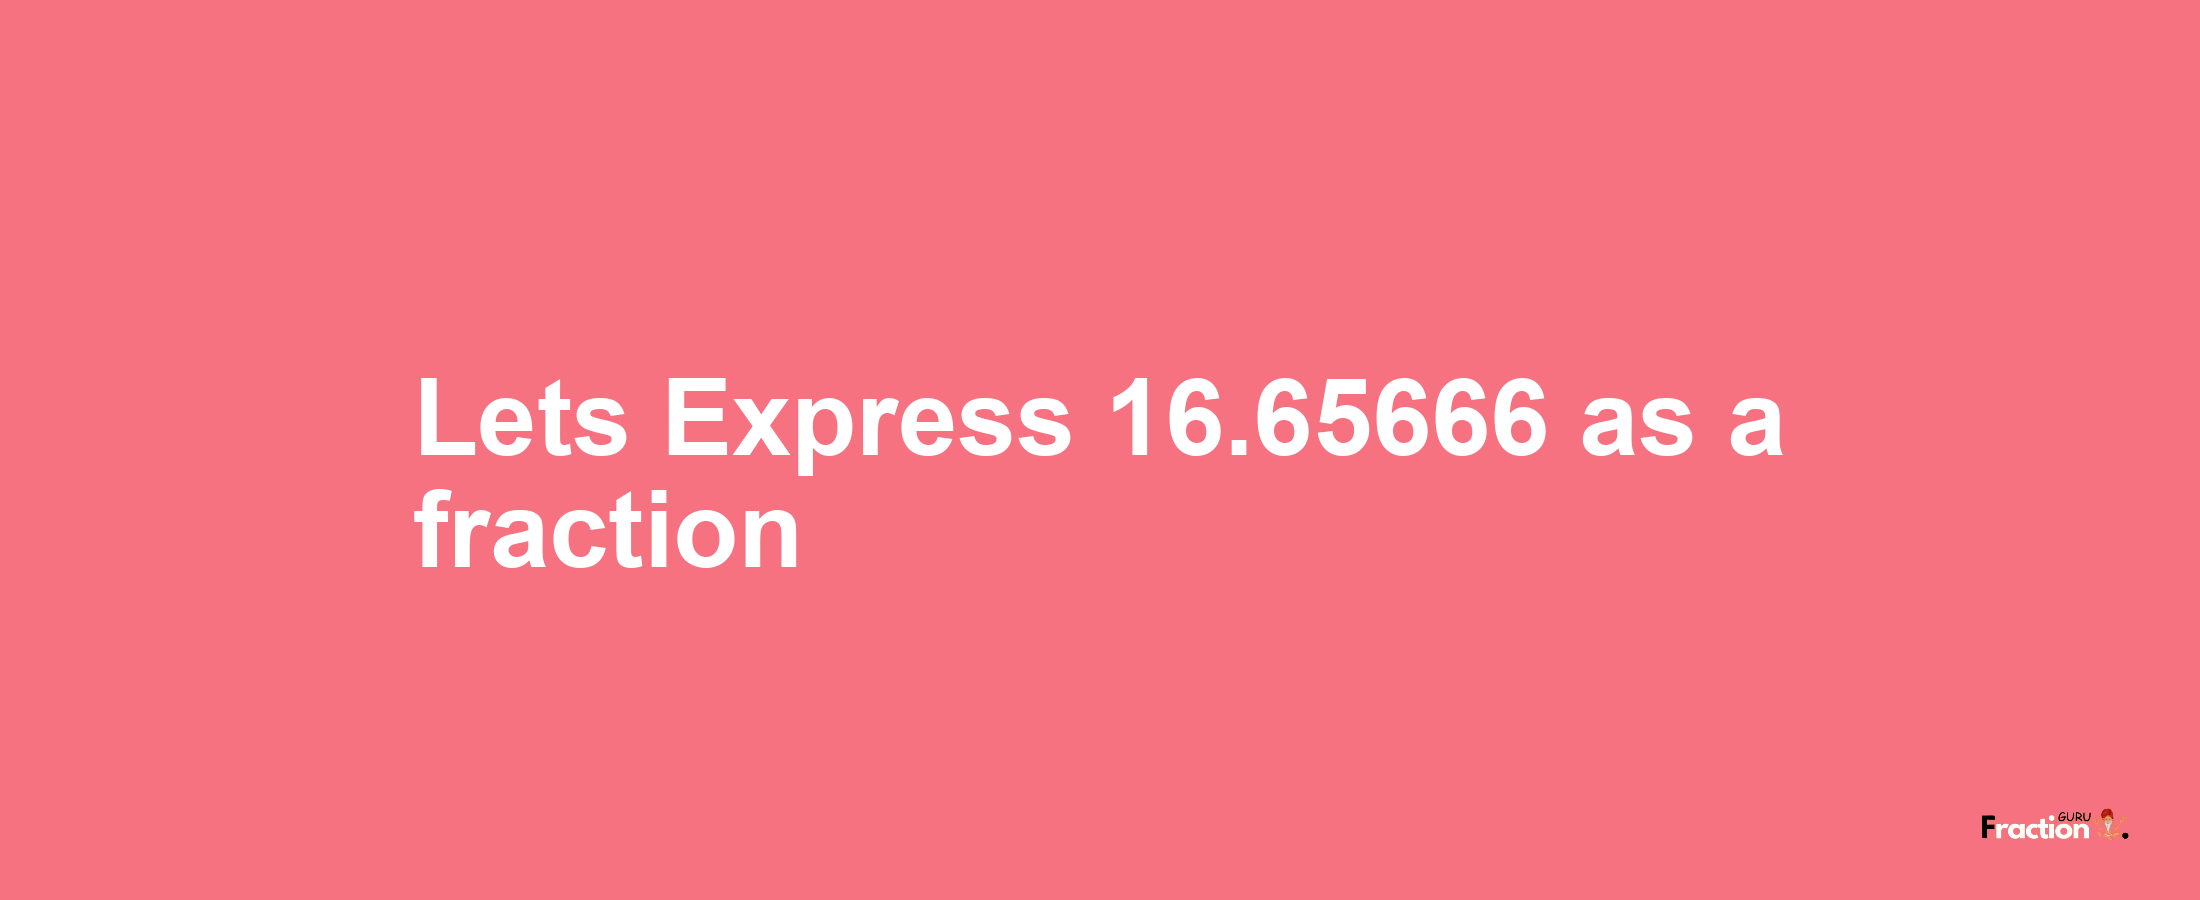 Lets Express 16.65666 as afraction